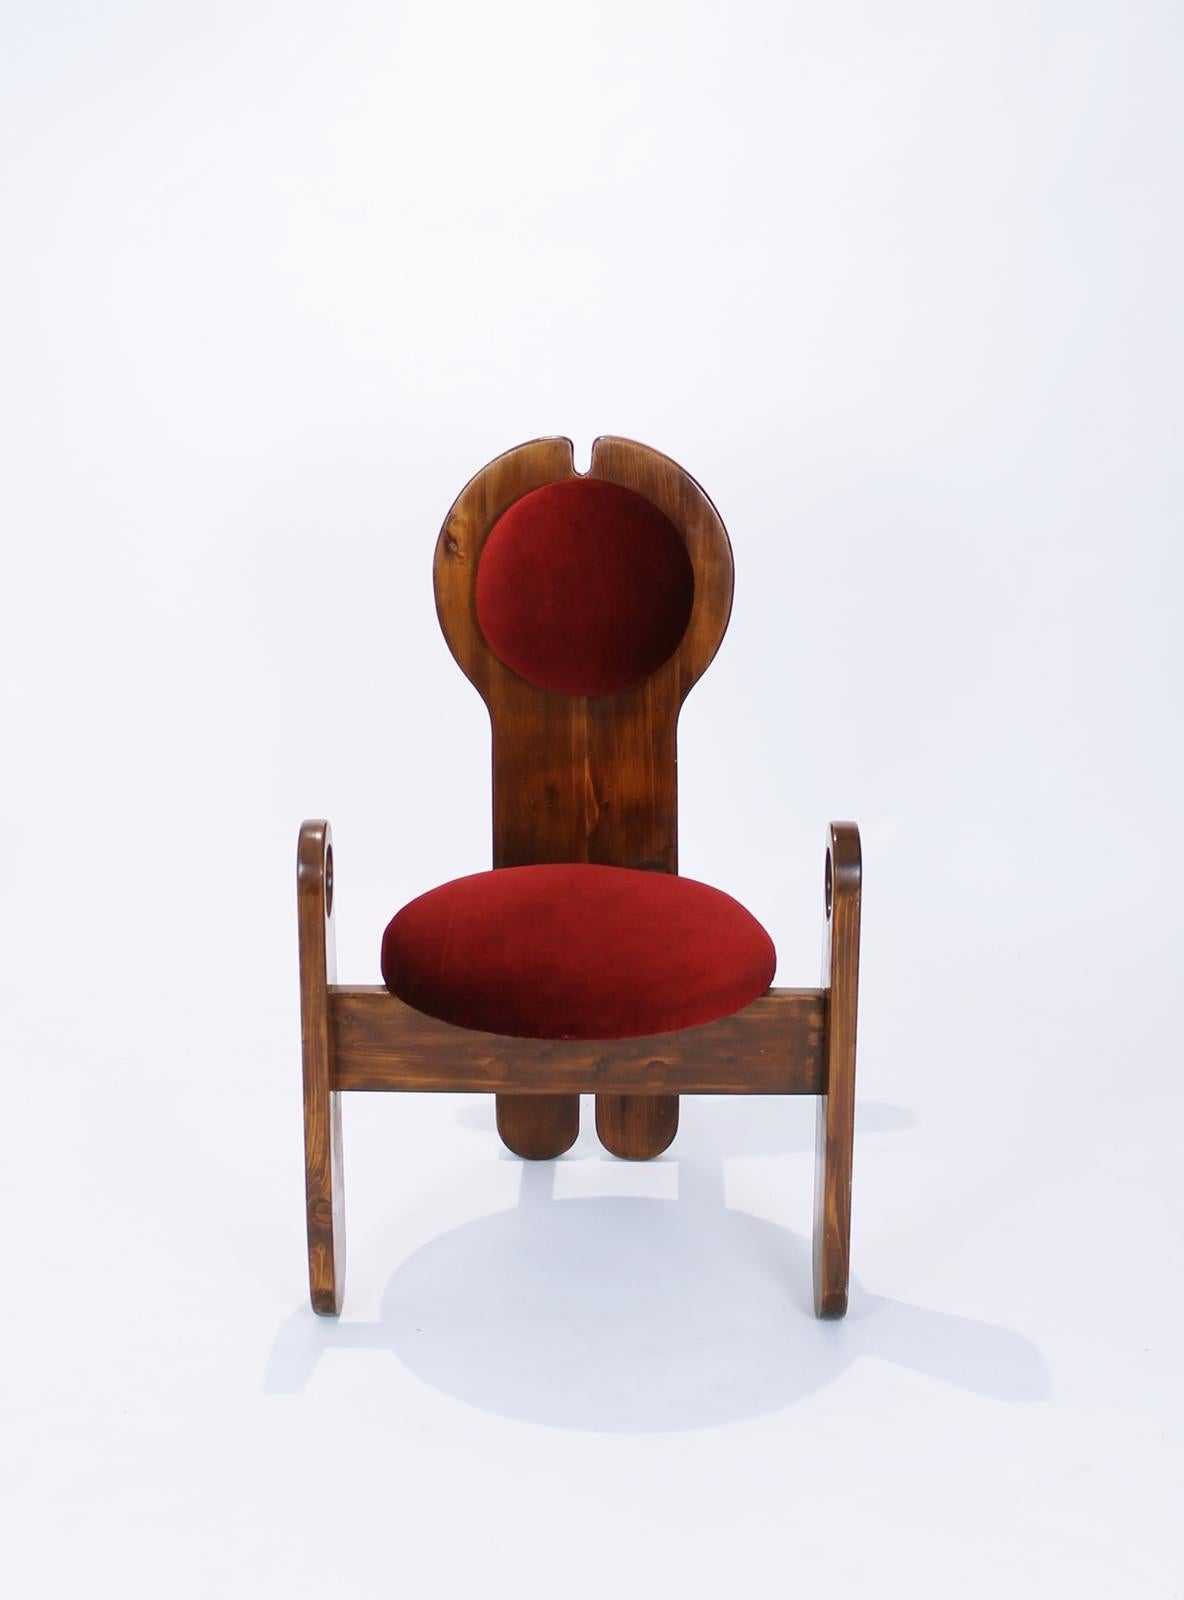 Unique and original form design piece from Hungary, 1970s.
 Designed by Szedleczkyné Leszl Mária. Signed.
 Very organic pistil-like shape with unique armrest.
 Seat and back upholstered in velvet.
Overall, this rare chair has a great